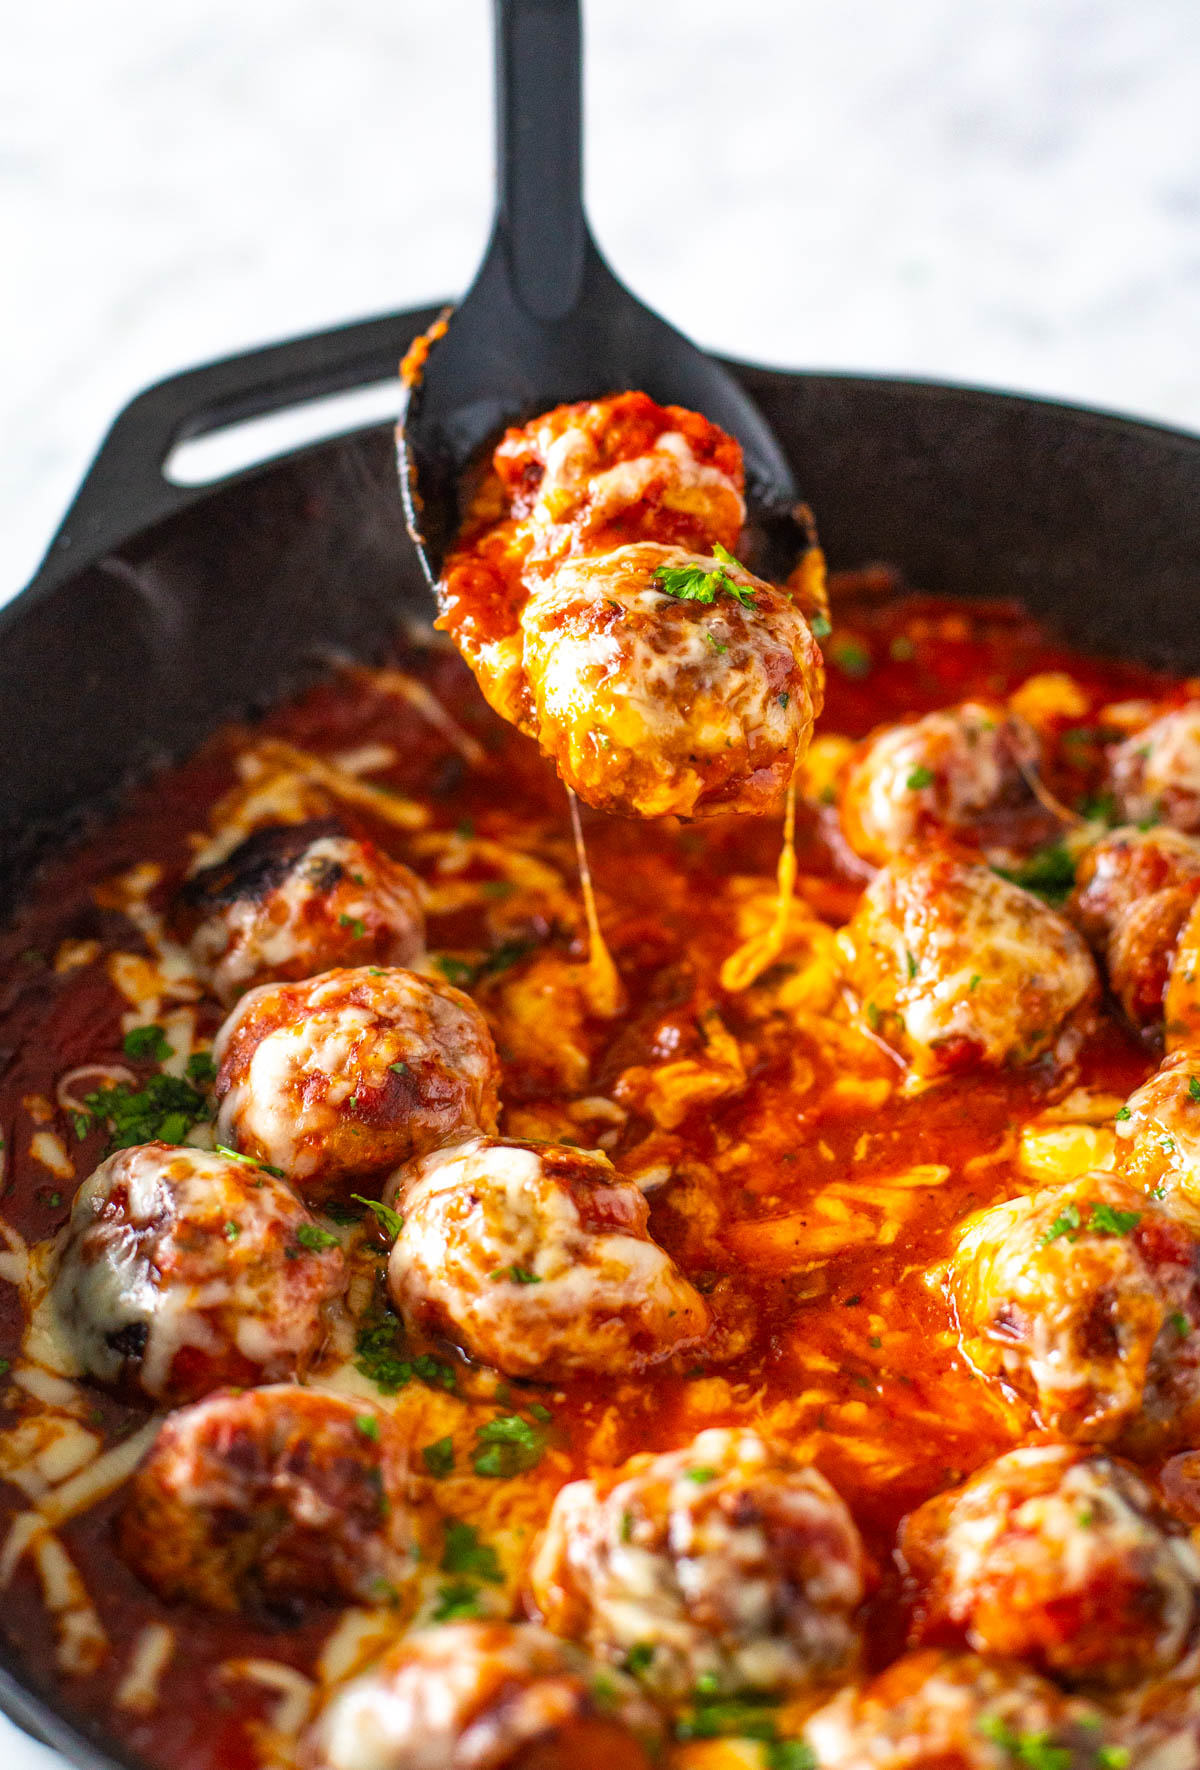 A chicken parmesan meatball being picked up from a skillet.